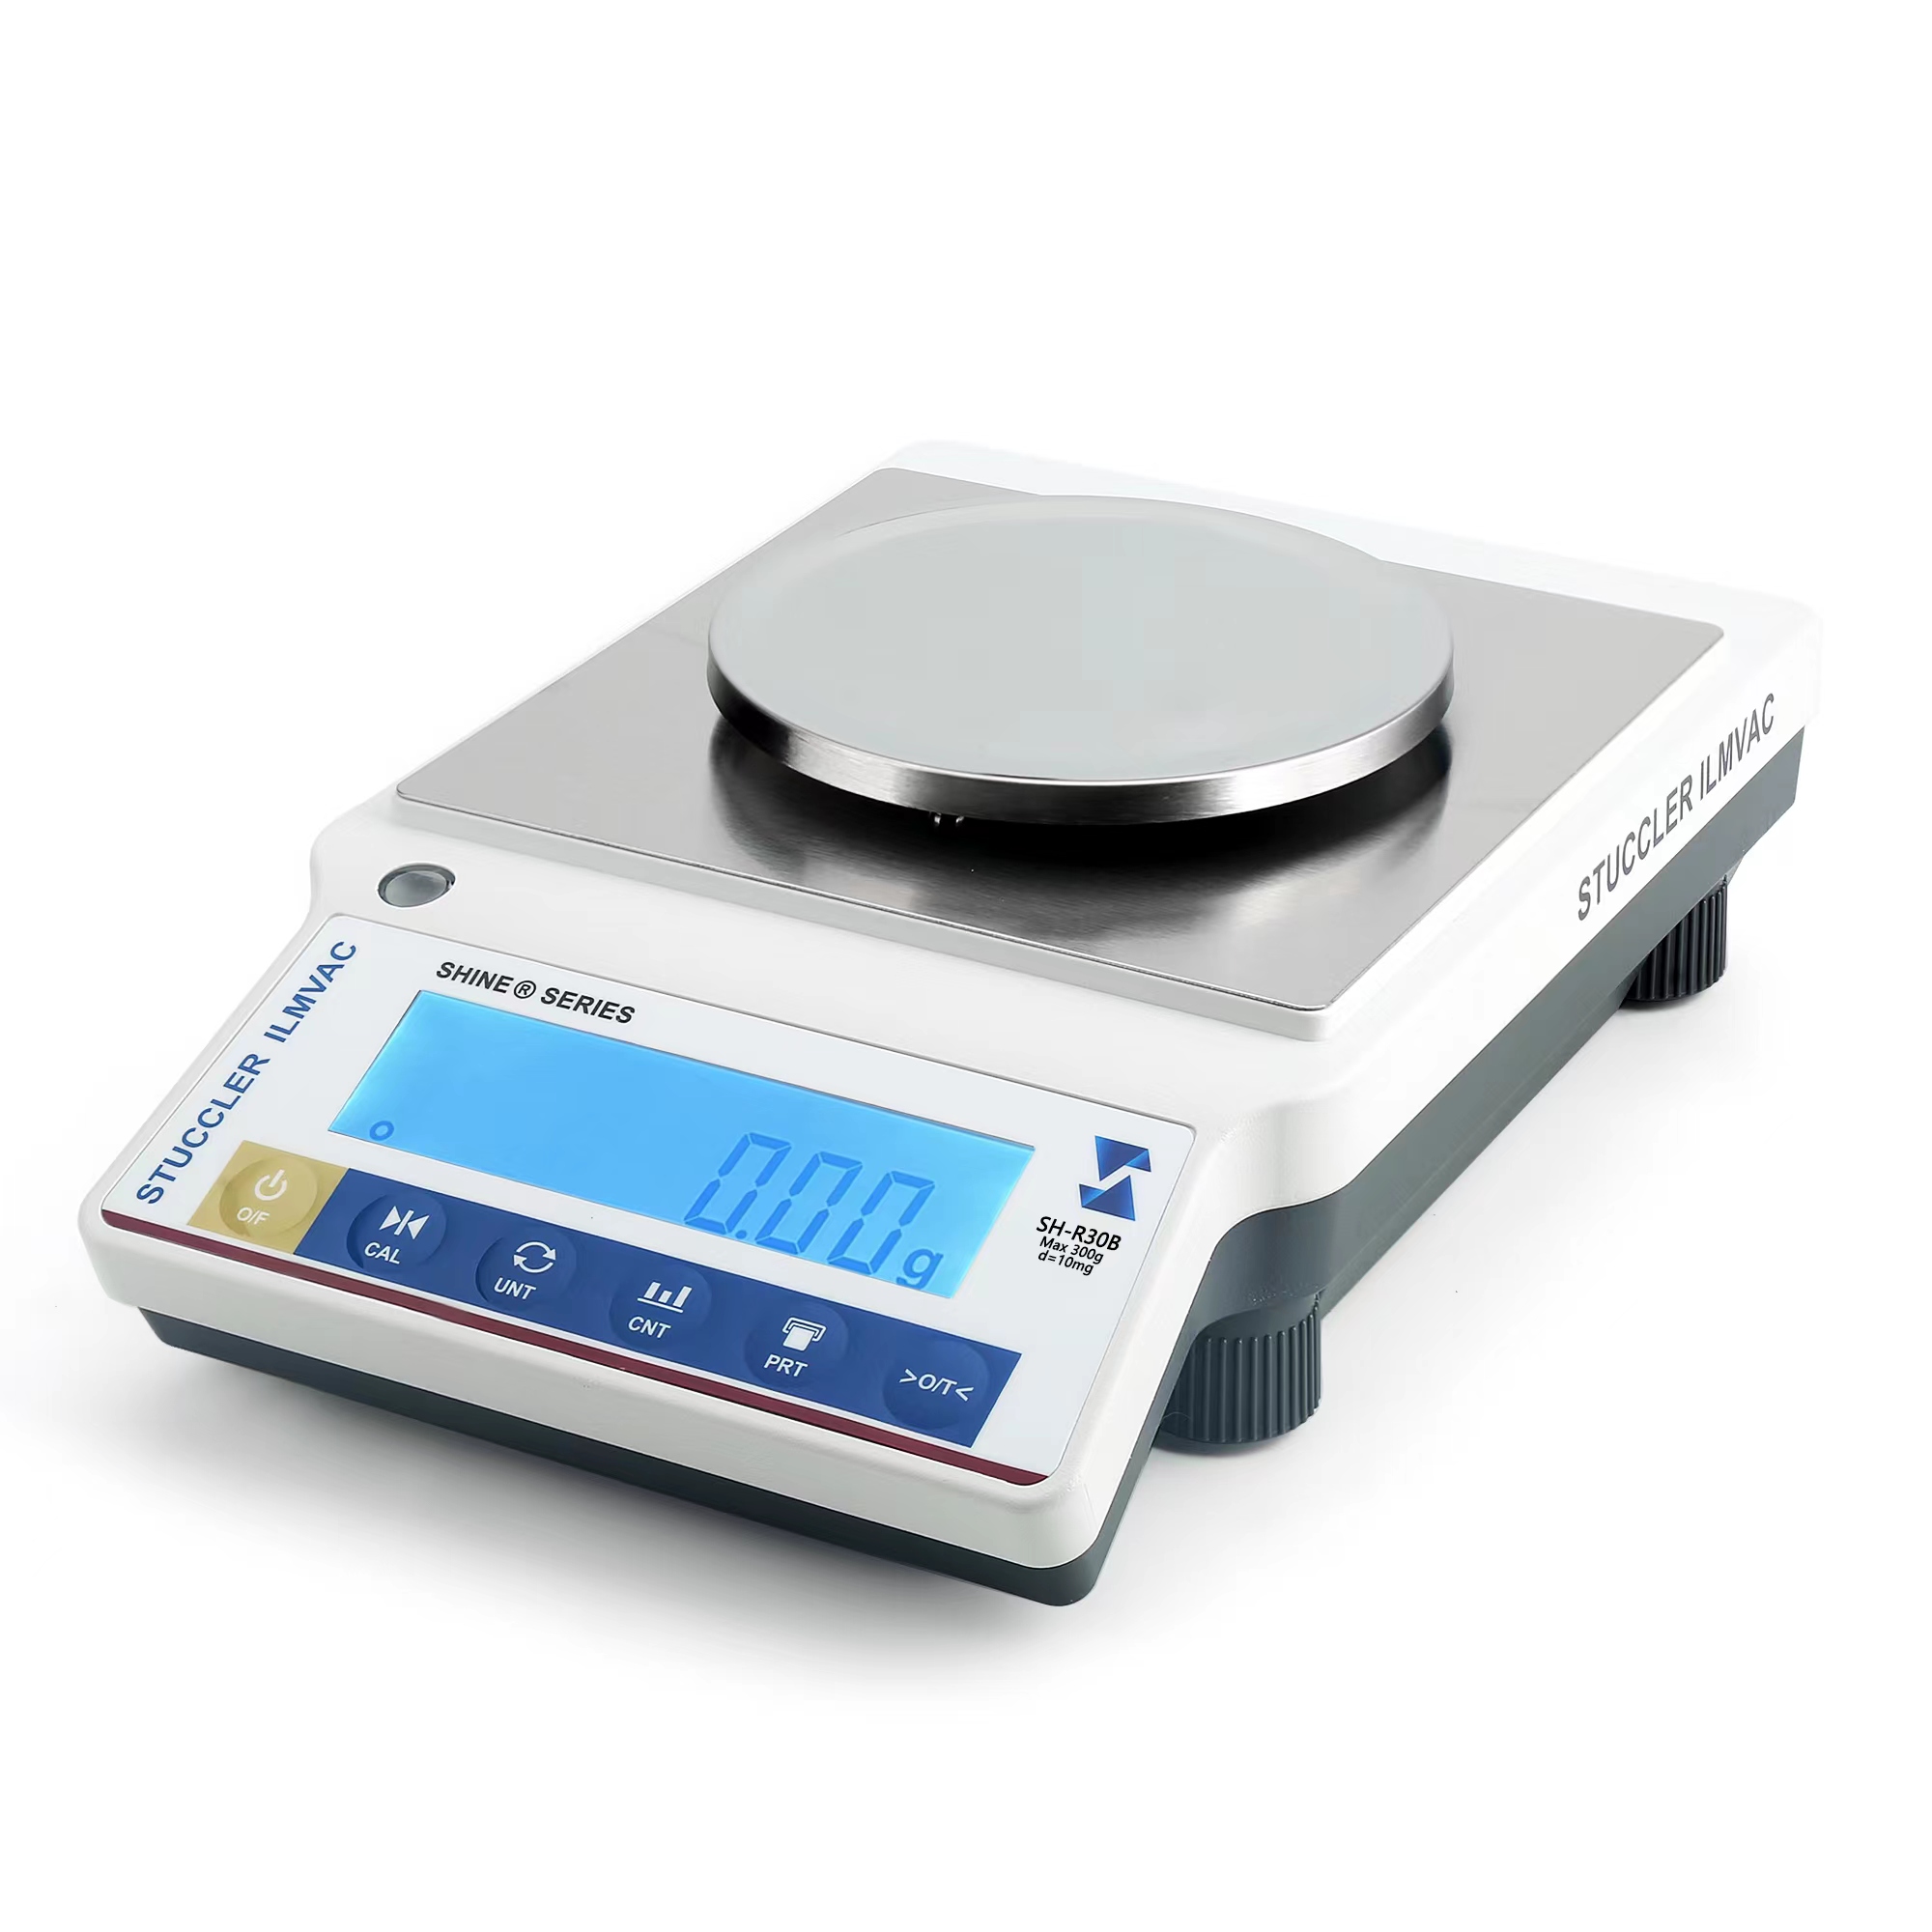 1mg 600g 500g 300g 0.001g Lab Scale Digital Jewellery LCD Electronic  Balance Weight Scale Laboratory Chemistry